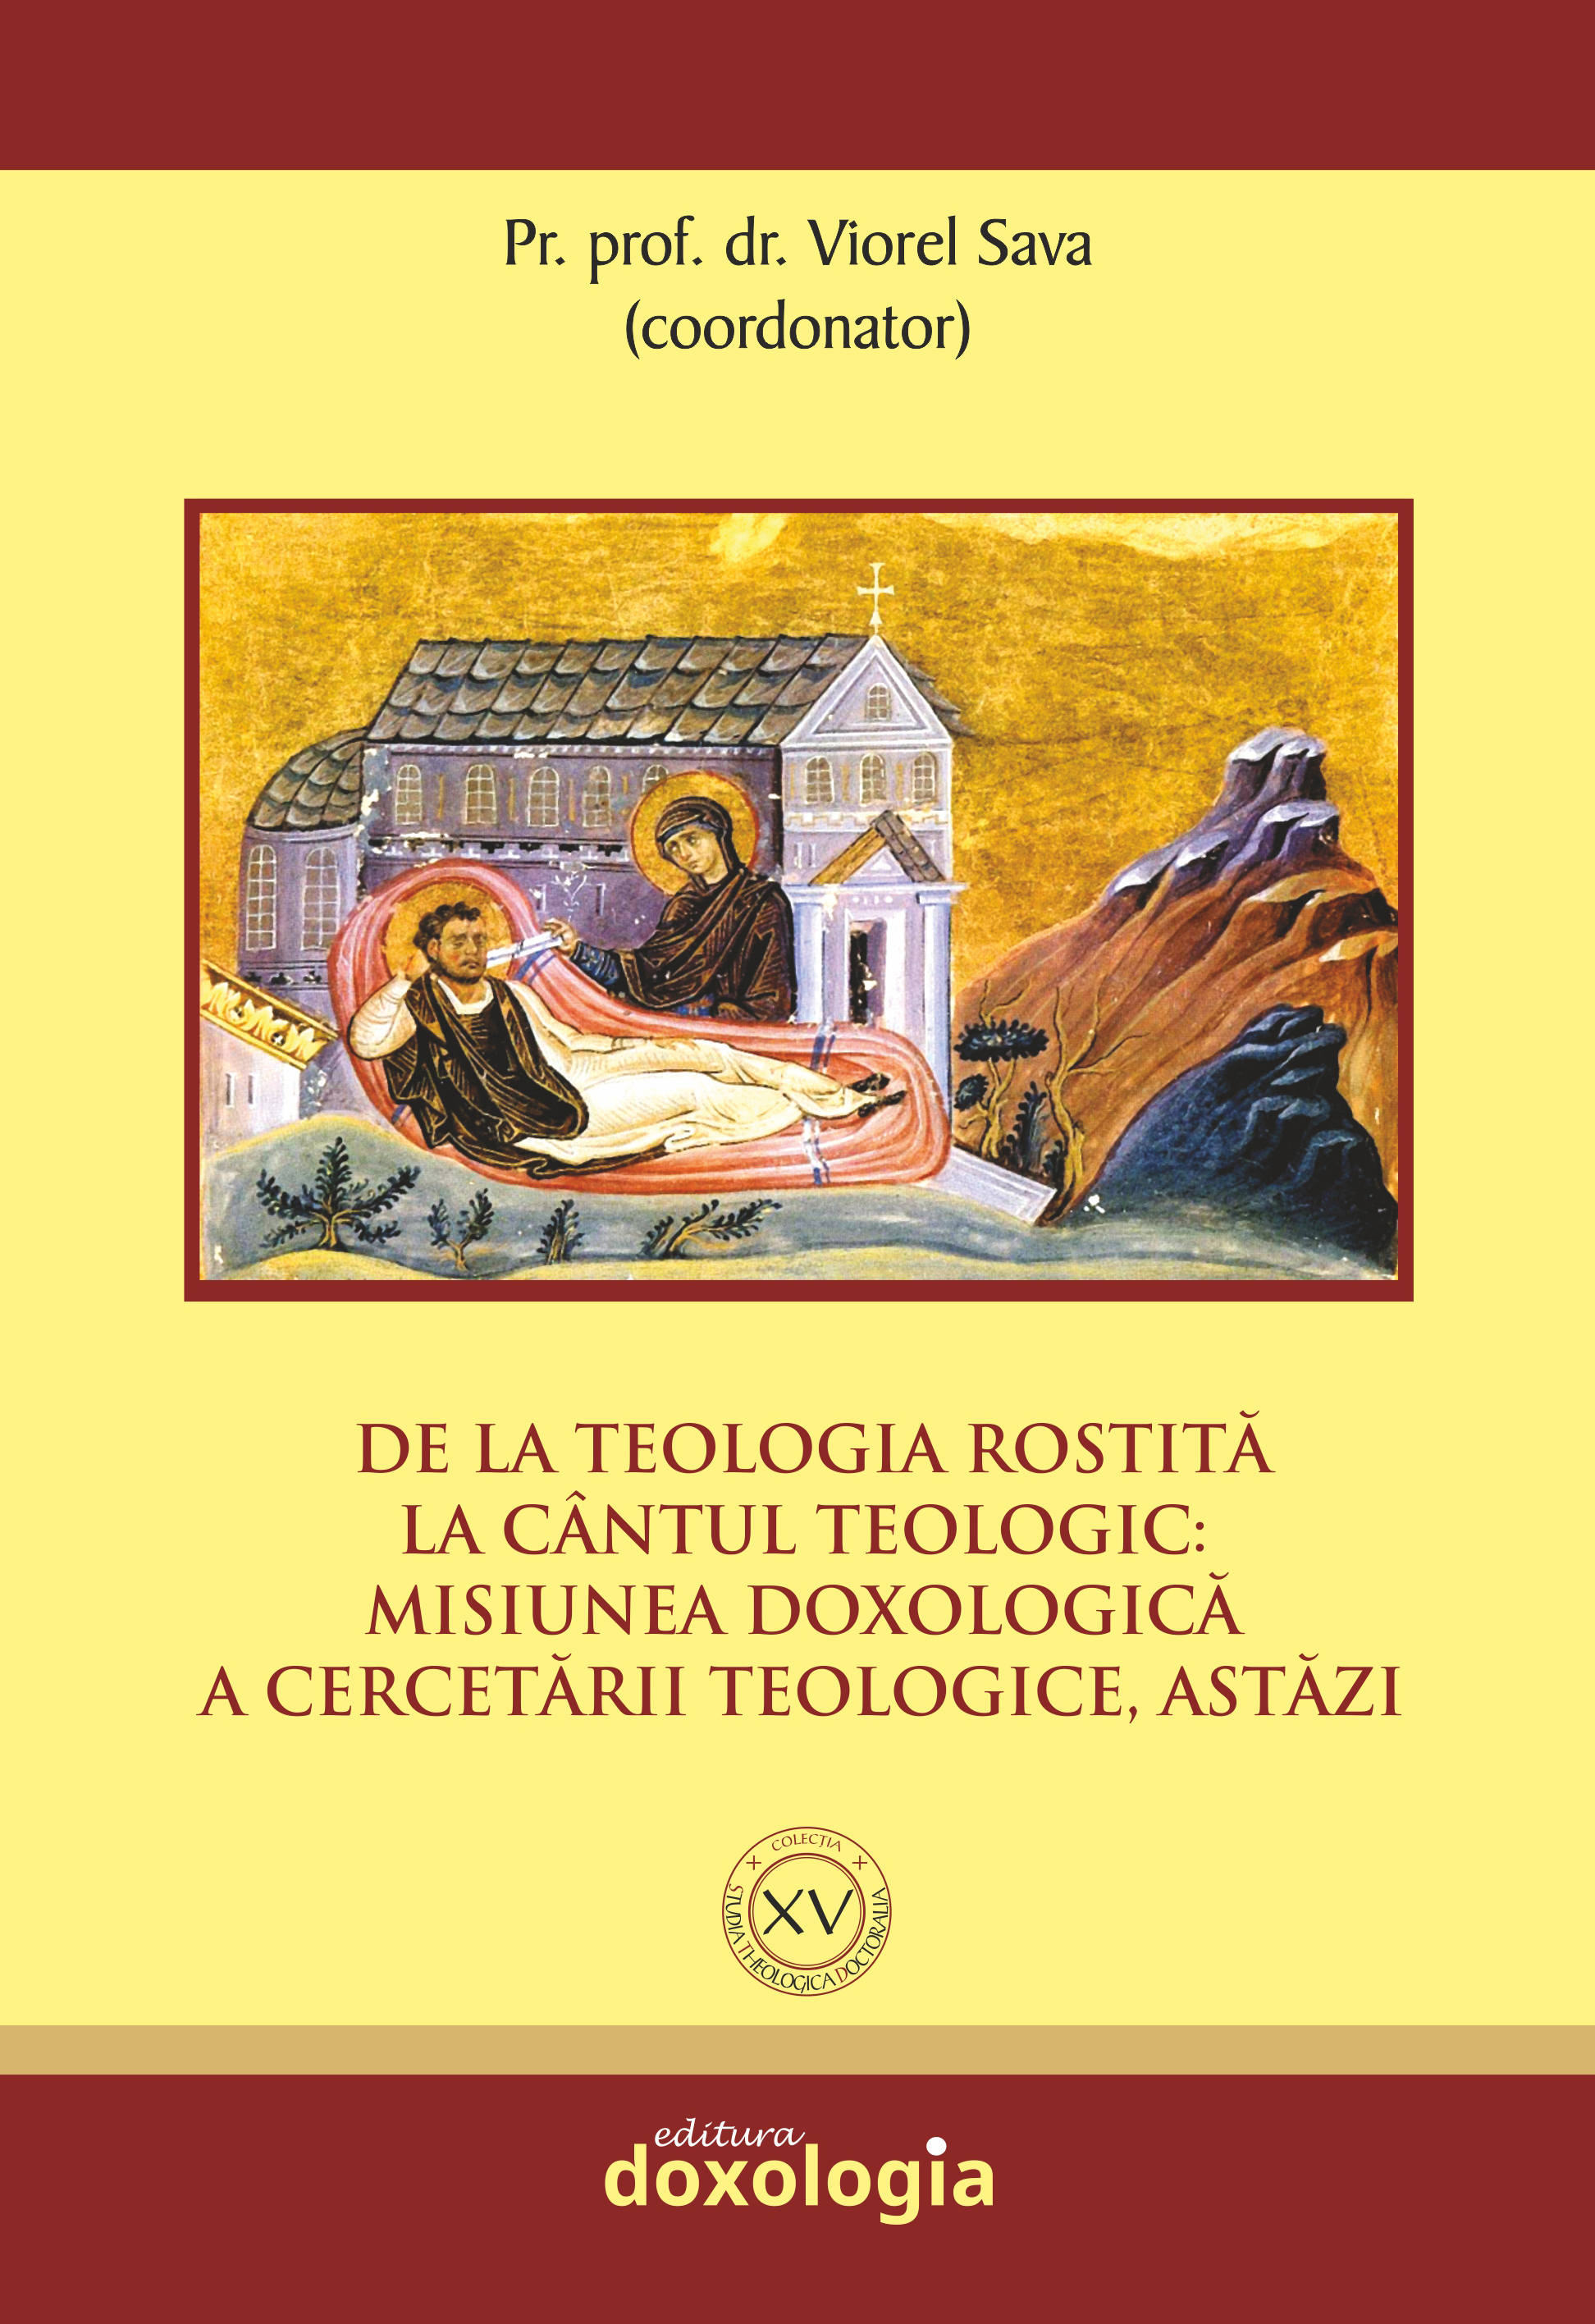 Studia Theologica Doctoralia vol. XV. From discursive theology to theological hymns: the doxological mission of current theological research